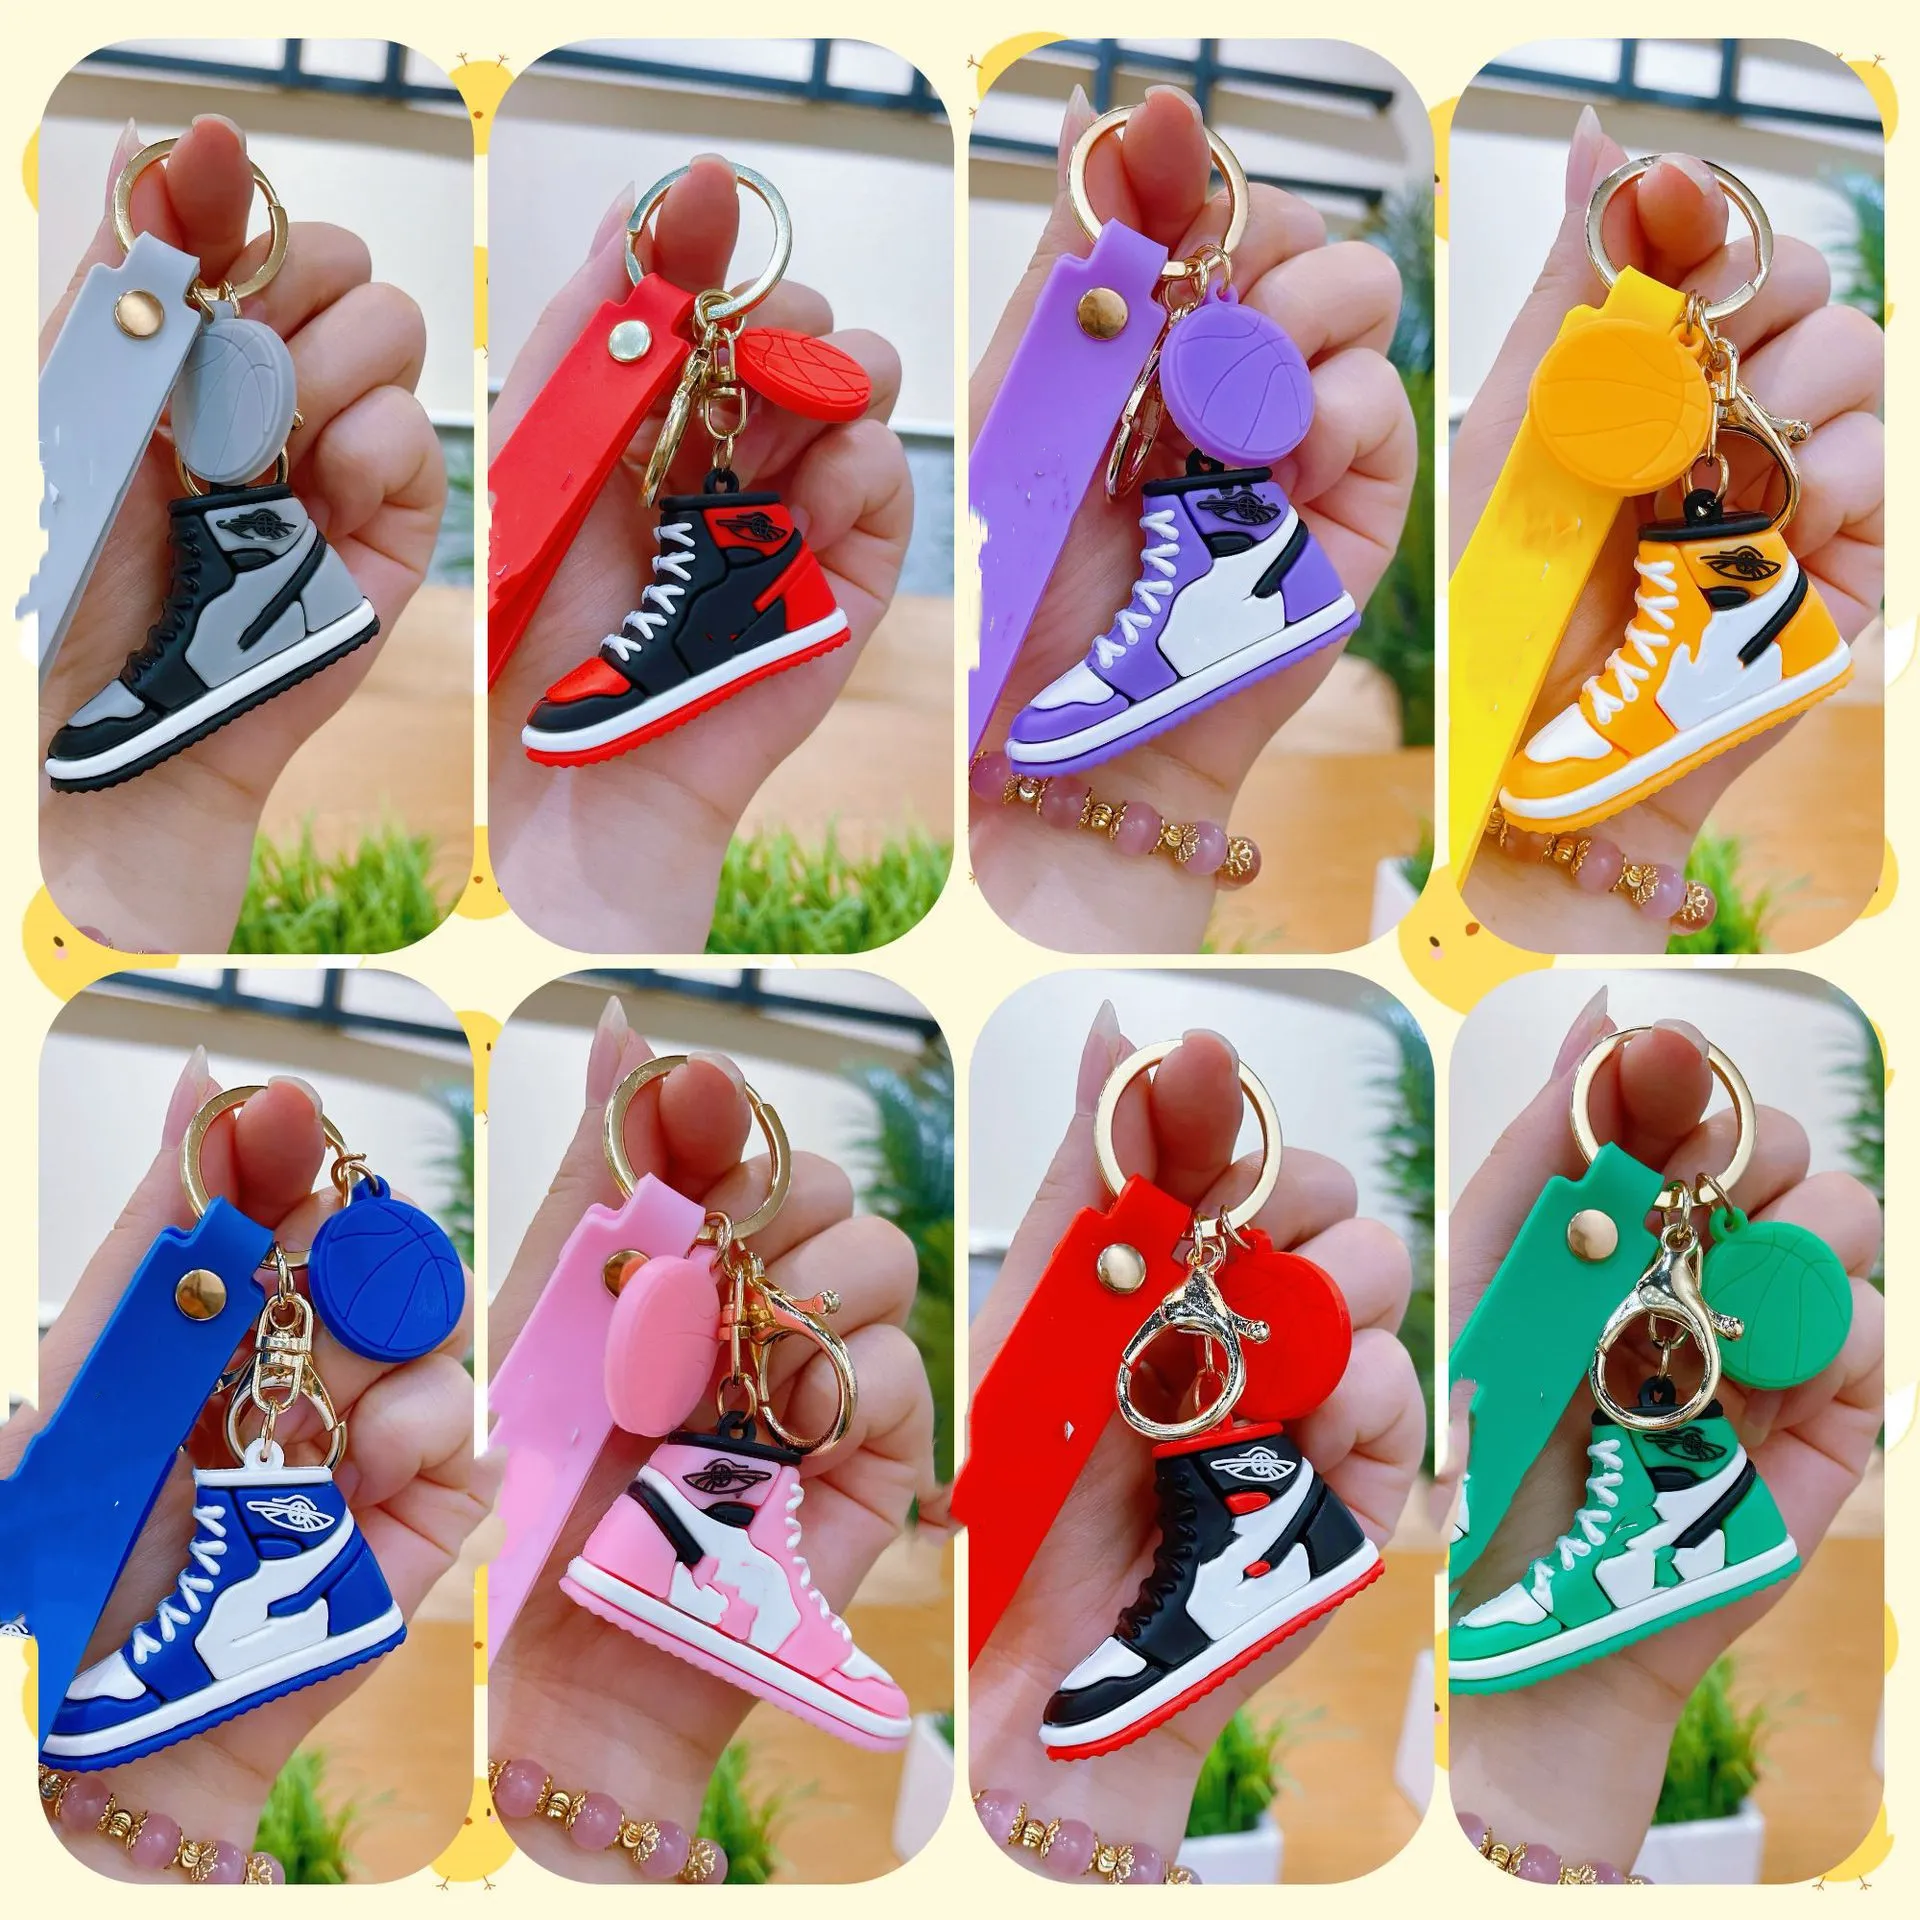 Creative 3D Sneakers Model Keychains Party Gift Souvenirs Basketball Shoes Keyring Car Backpack Pendant Gifts Sports Shoes Key Chains 8 Colors